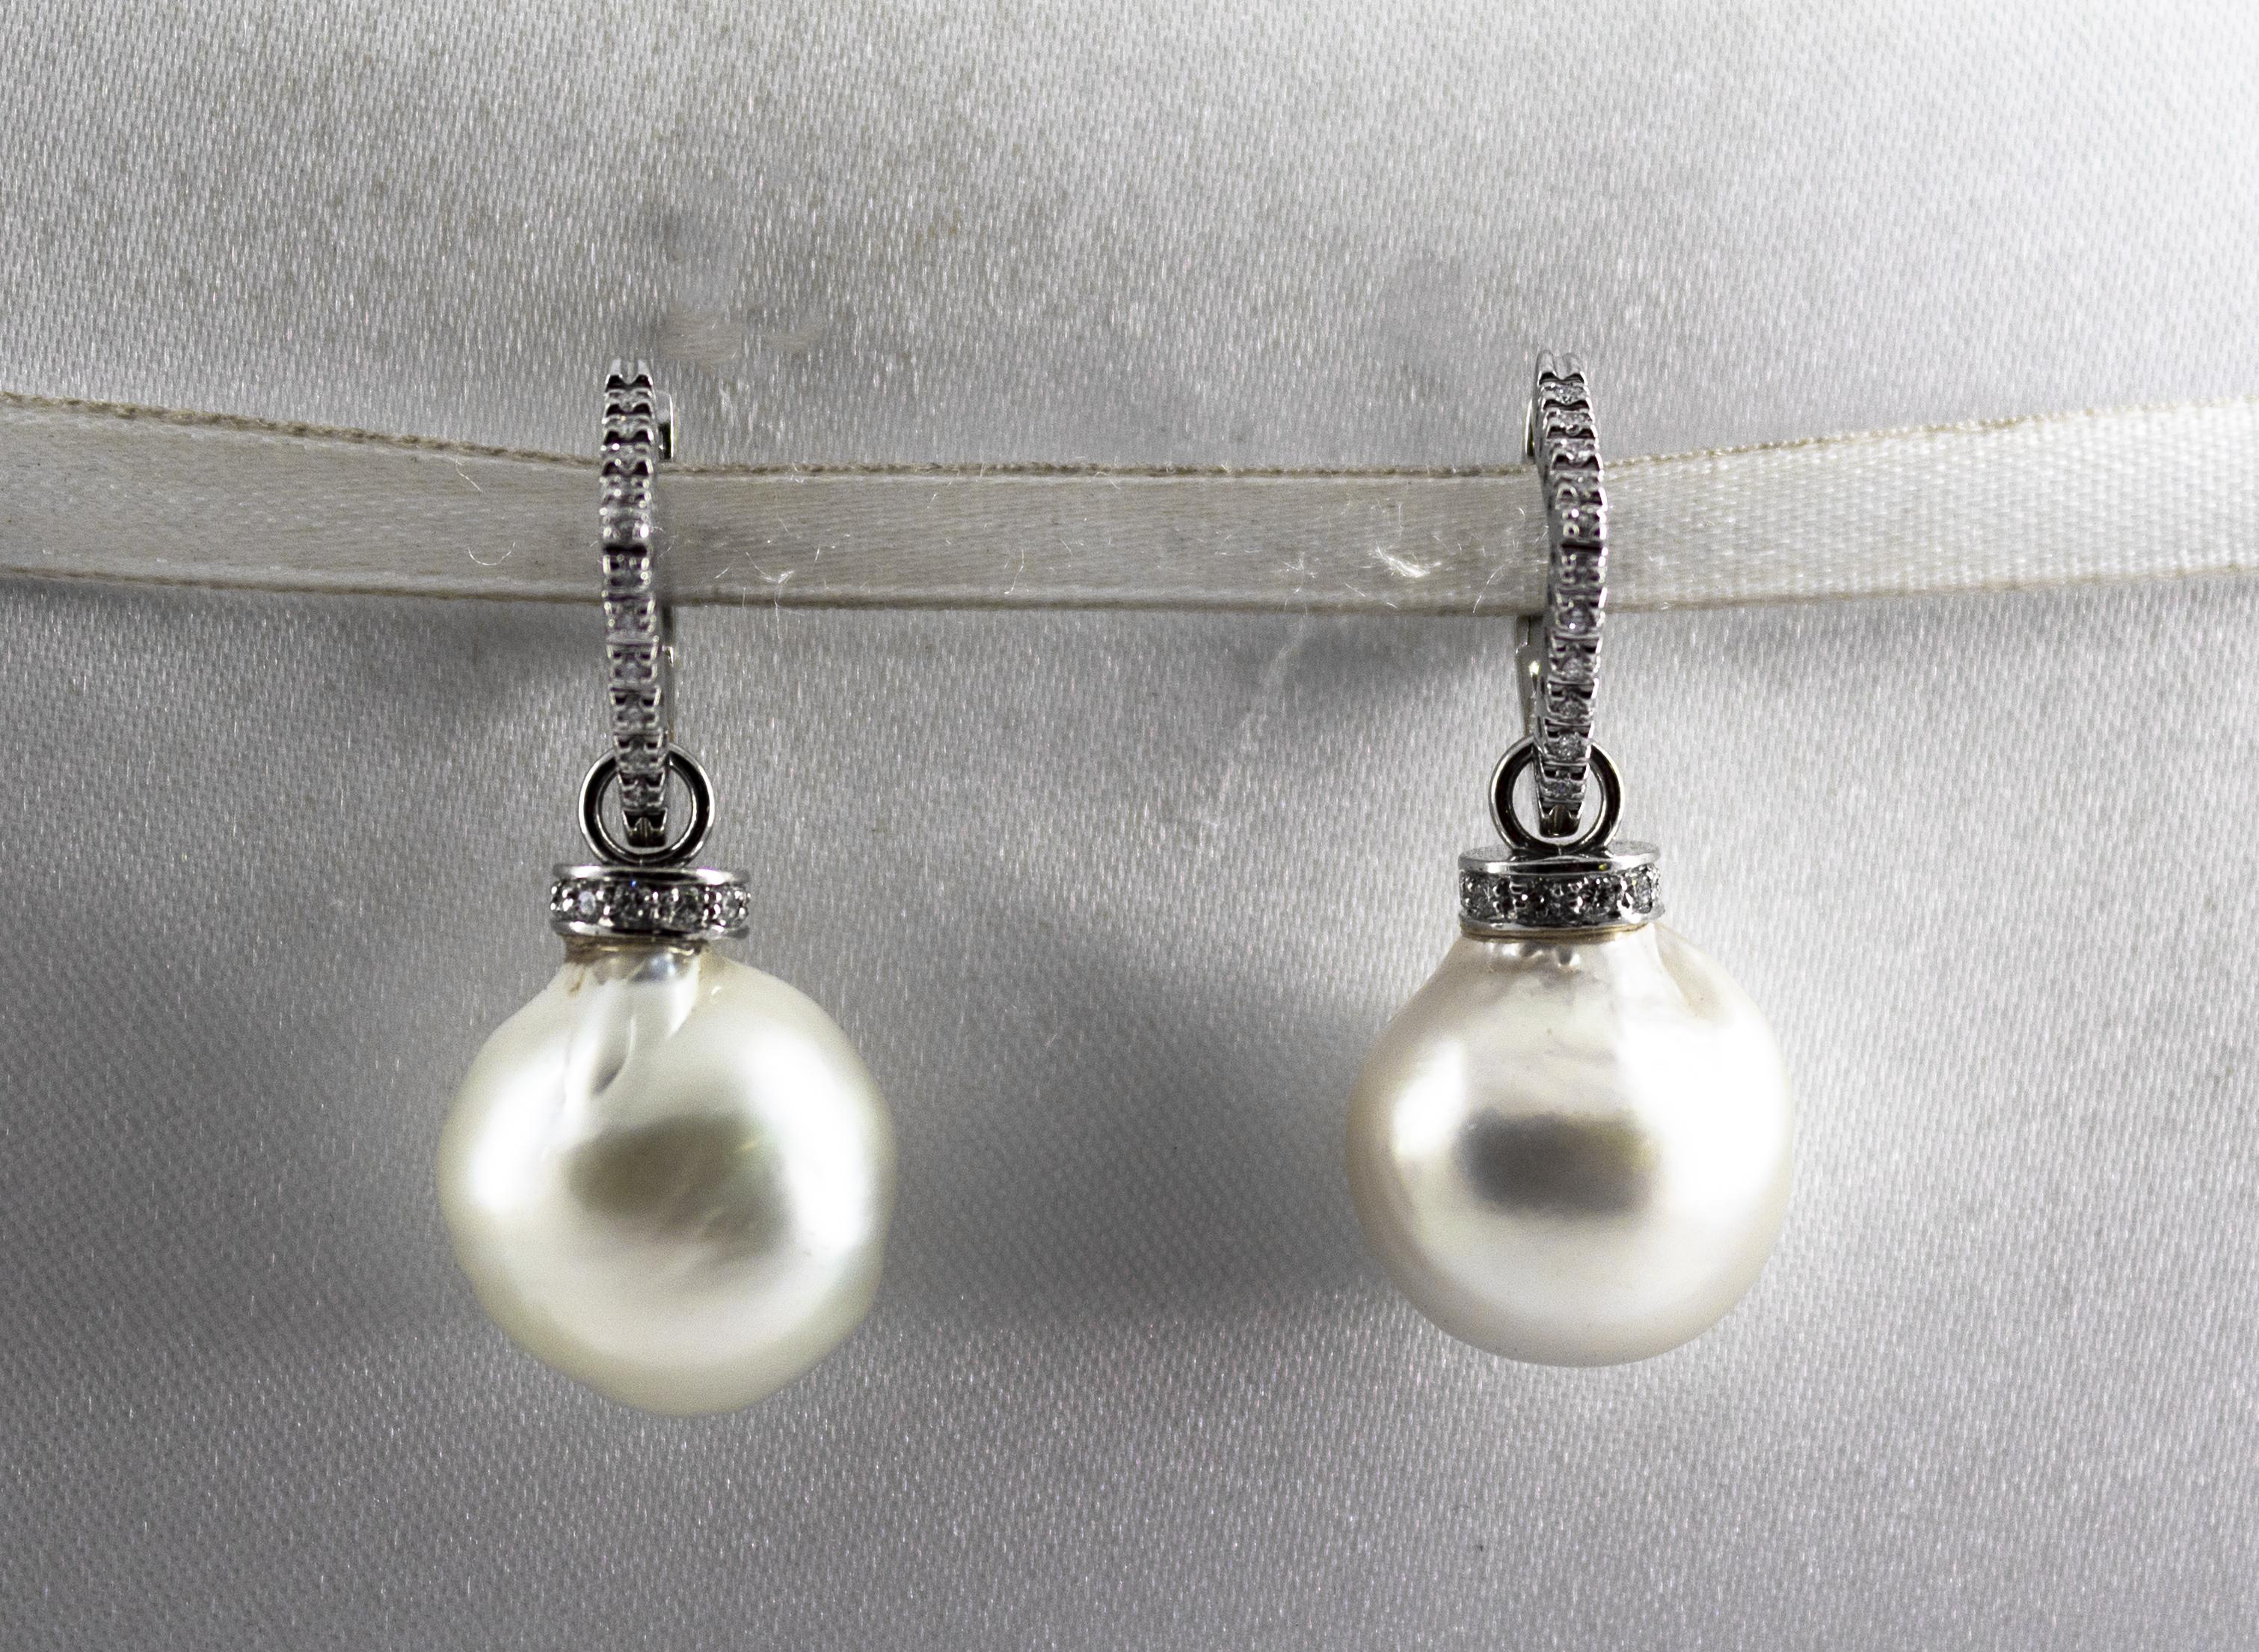 These Earrings are made of 18K White Gold.
These Earrings have 0.34 Carats of White Diamonds.
These Earrings have also Australian Pearls.
We're a workshop so every piece is handmade, customizable and resizable.